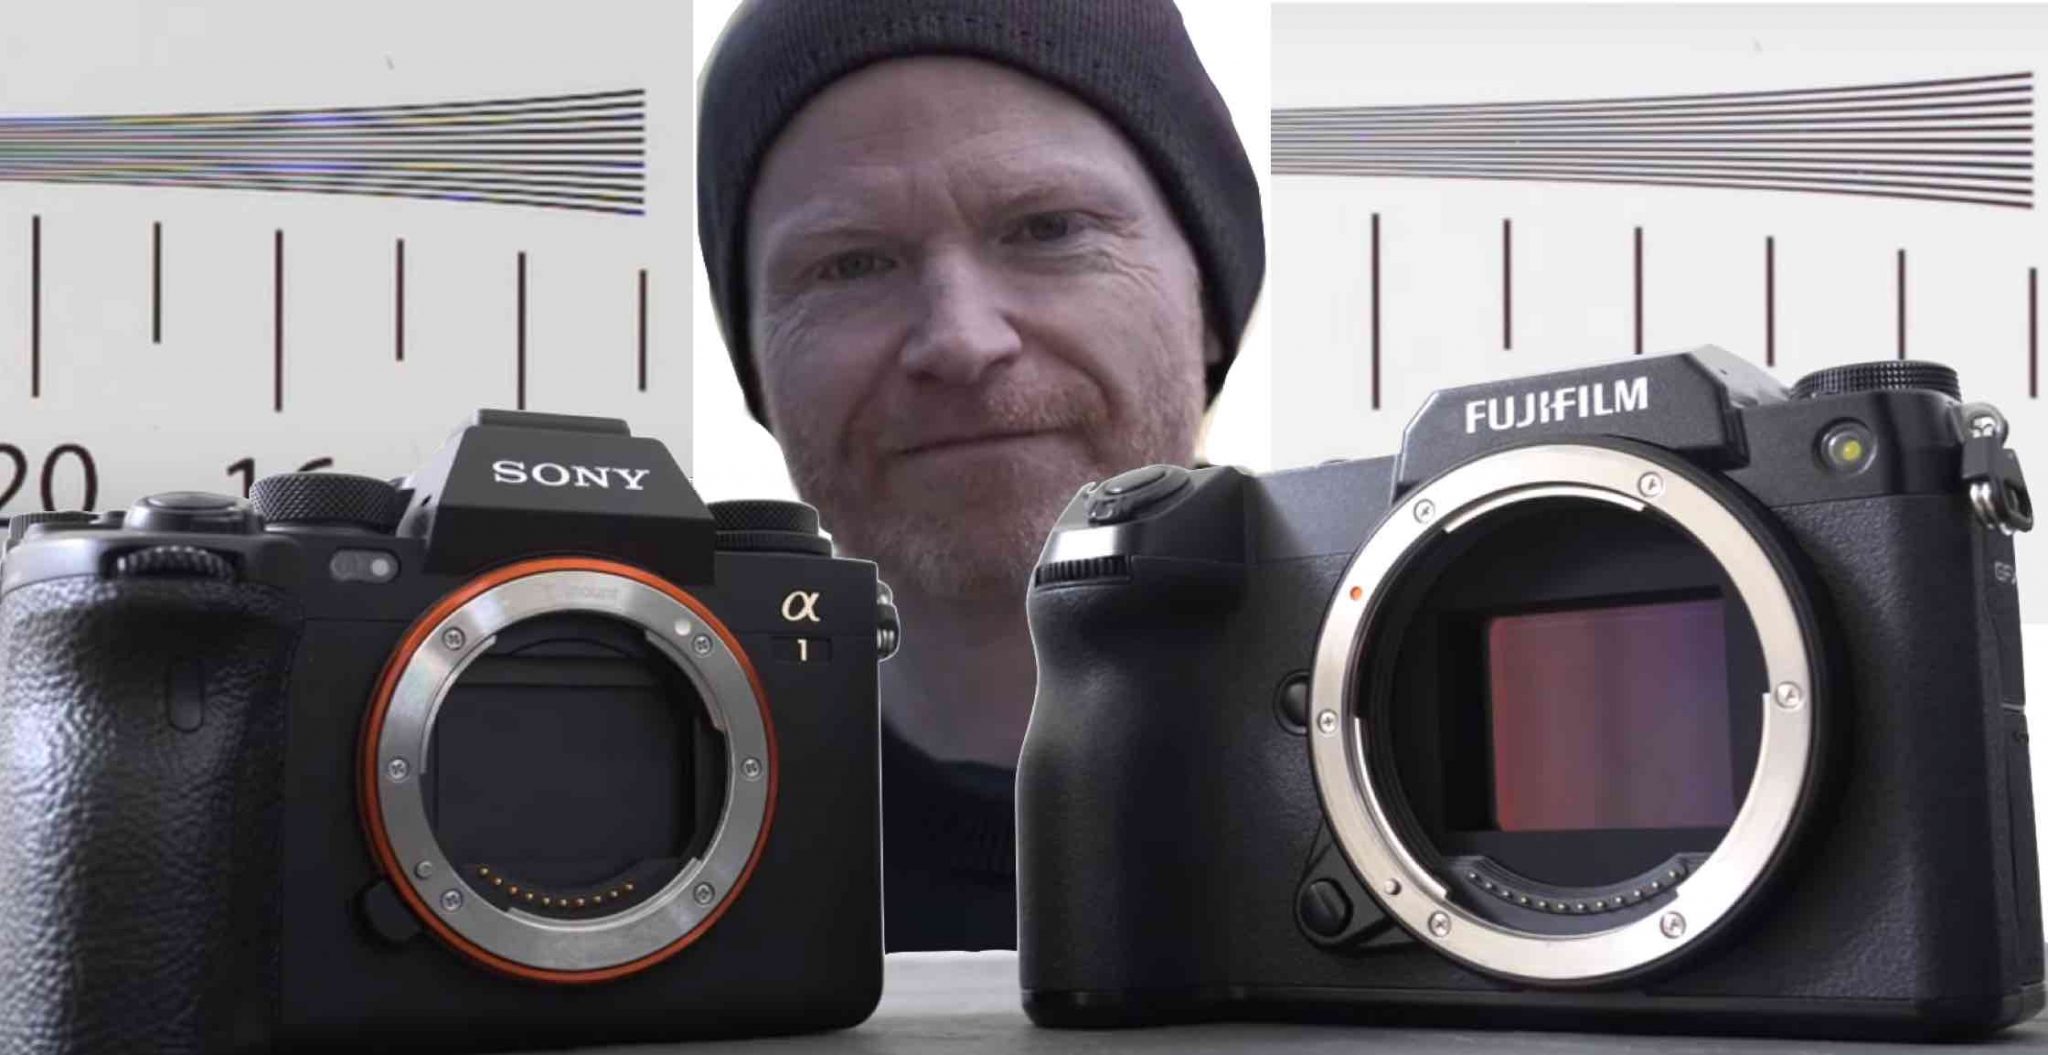 Fujifilm Gfx S Cameralabs Review Vs Sony A A Tremendous Inspirational And Satisfying